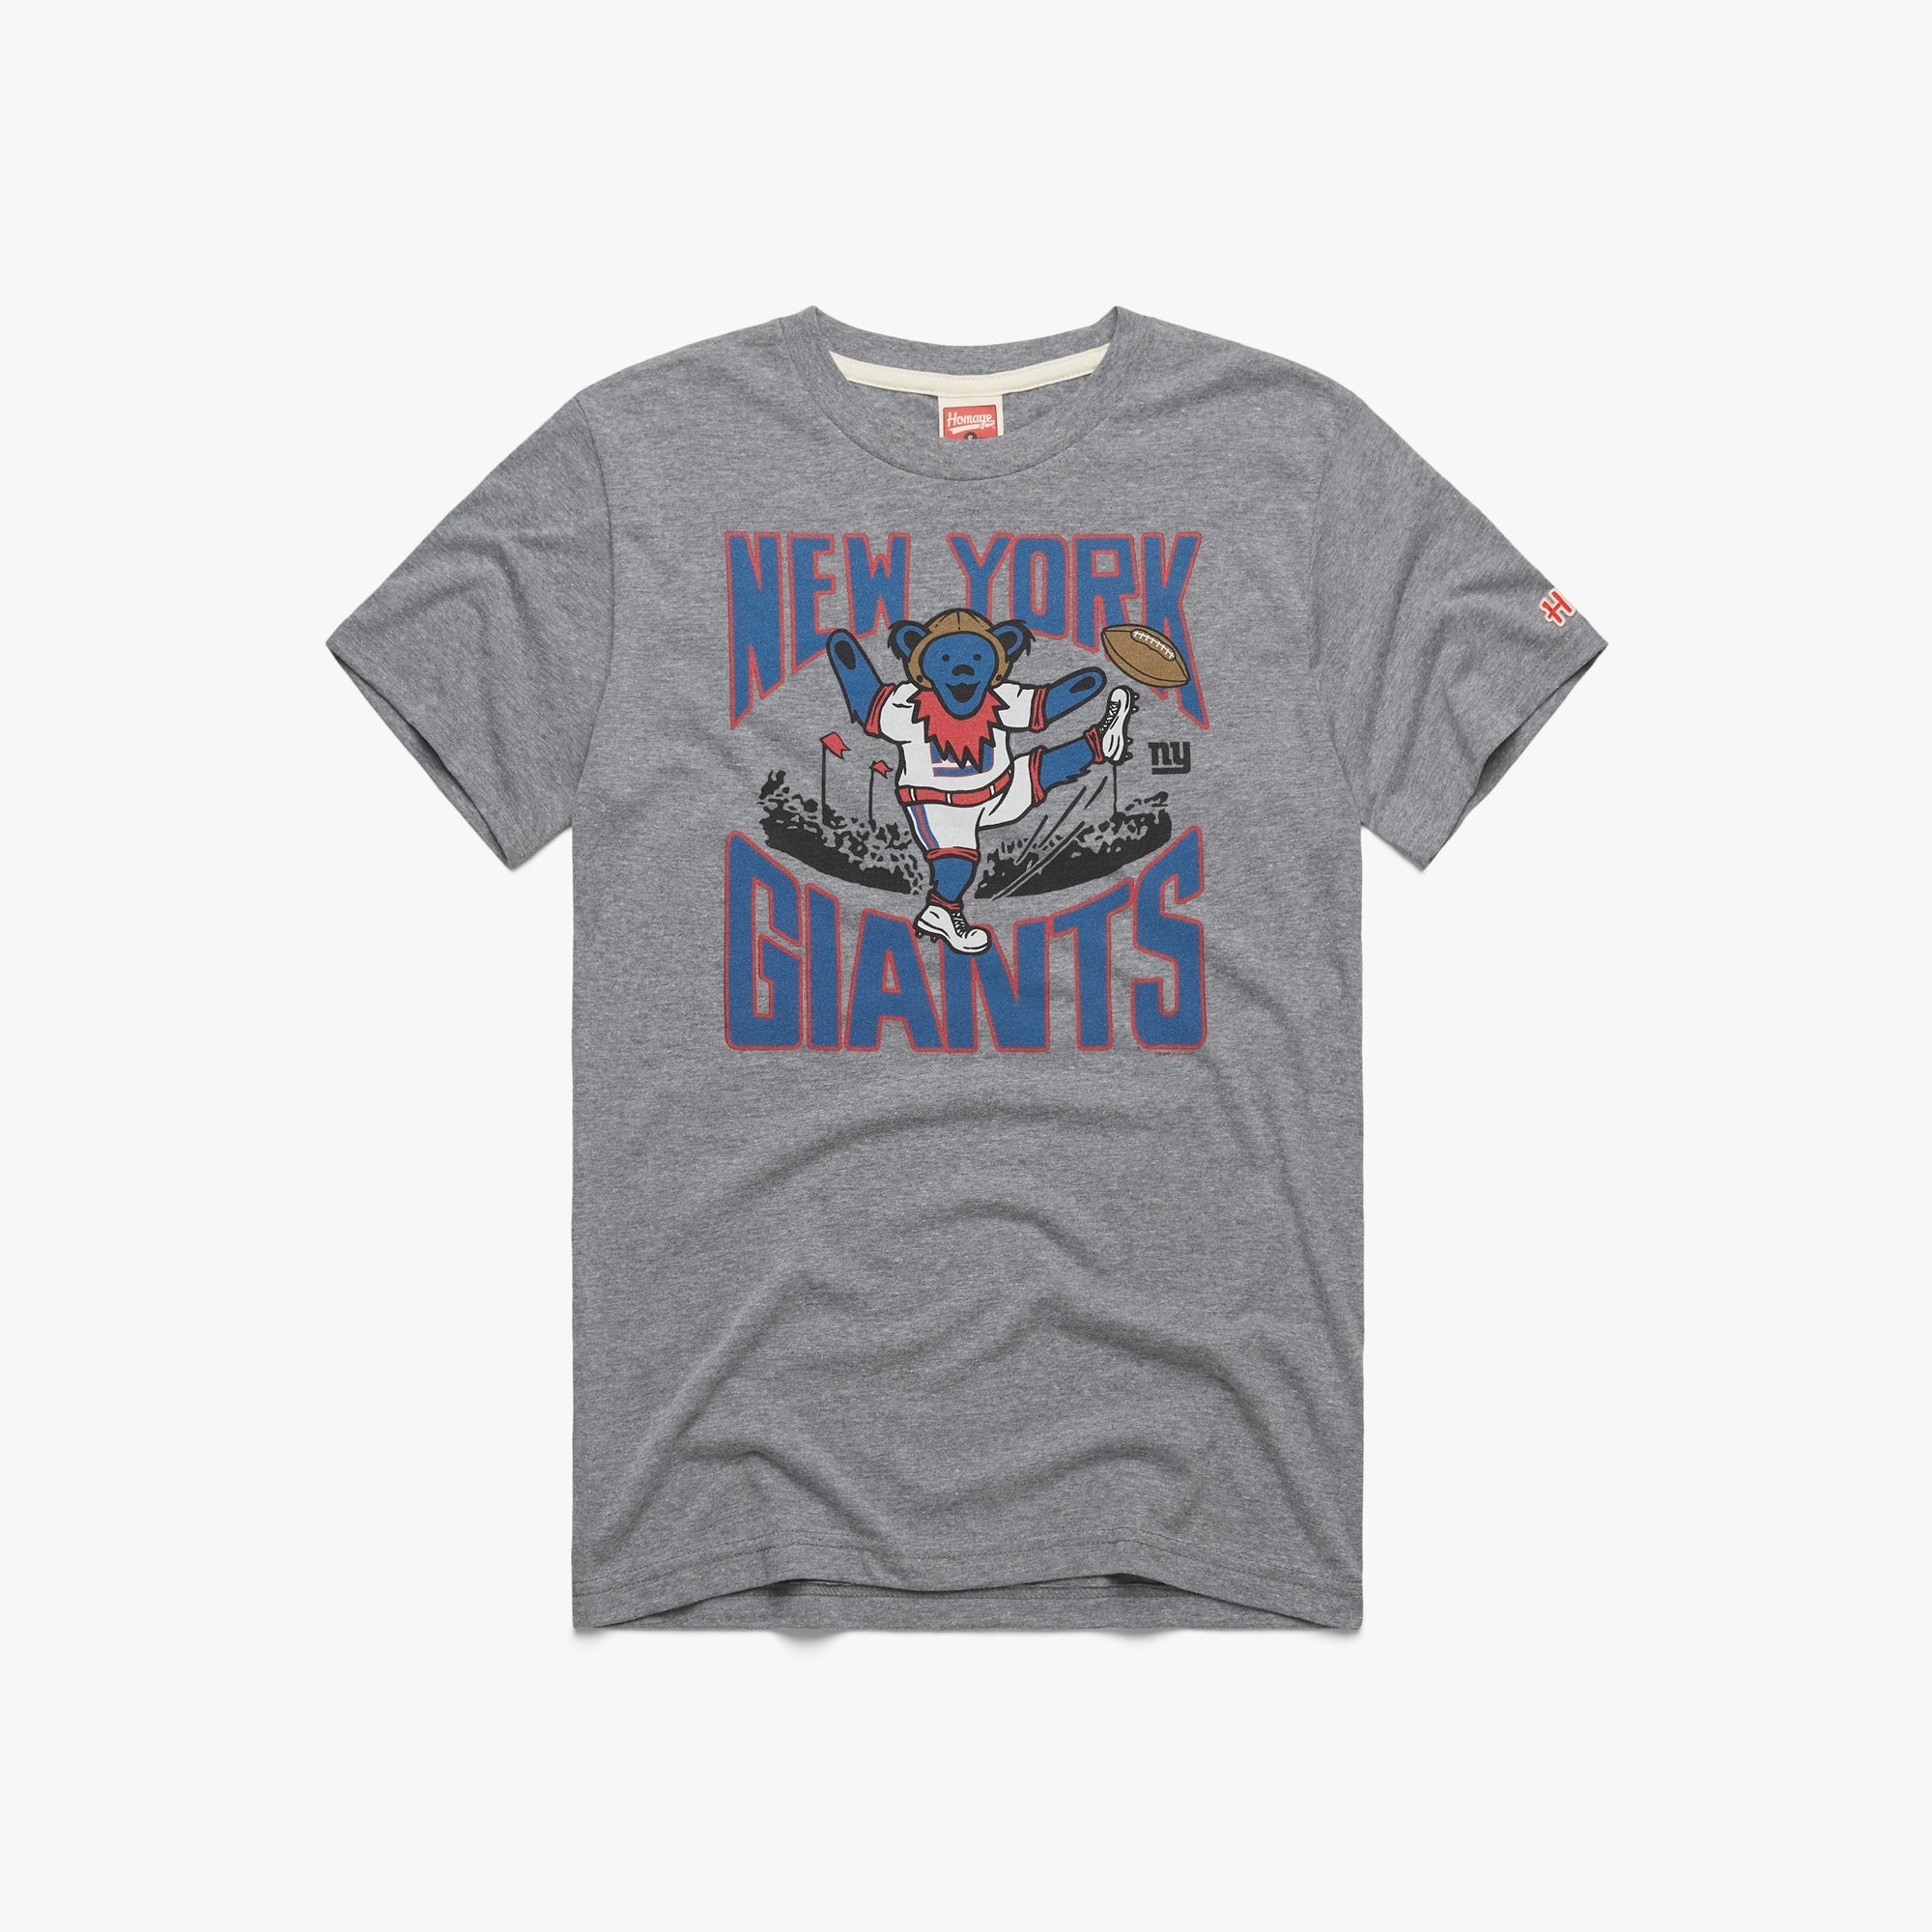 NFL x Grateful Dead x New York Giants T-Shirt from Homage. | Officially Licensed Vintage NFL Apparel from Homage Pro Shop.